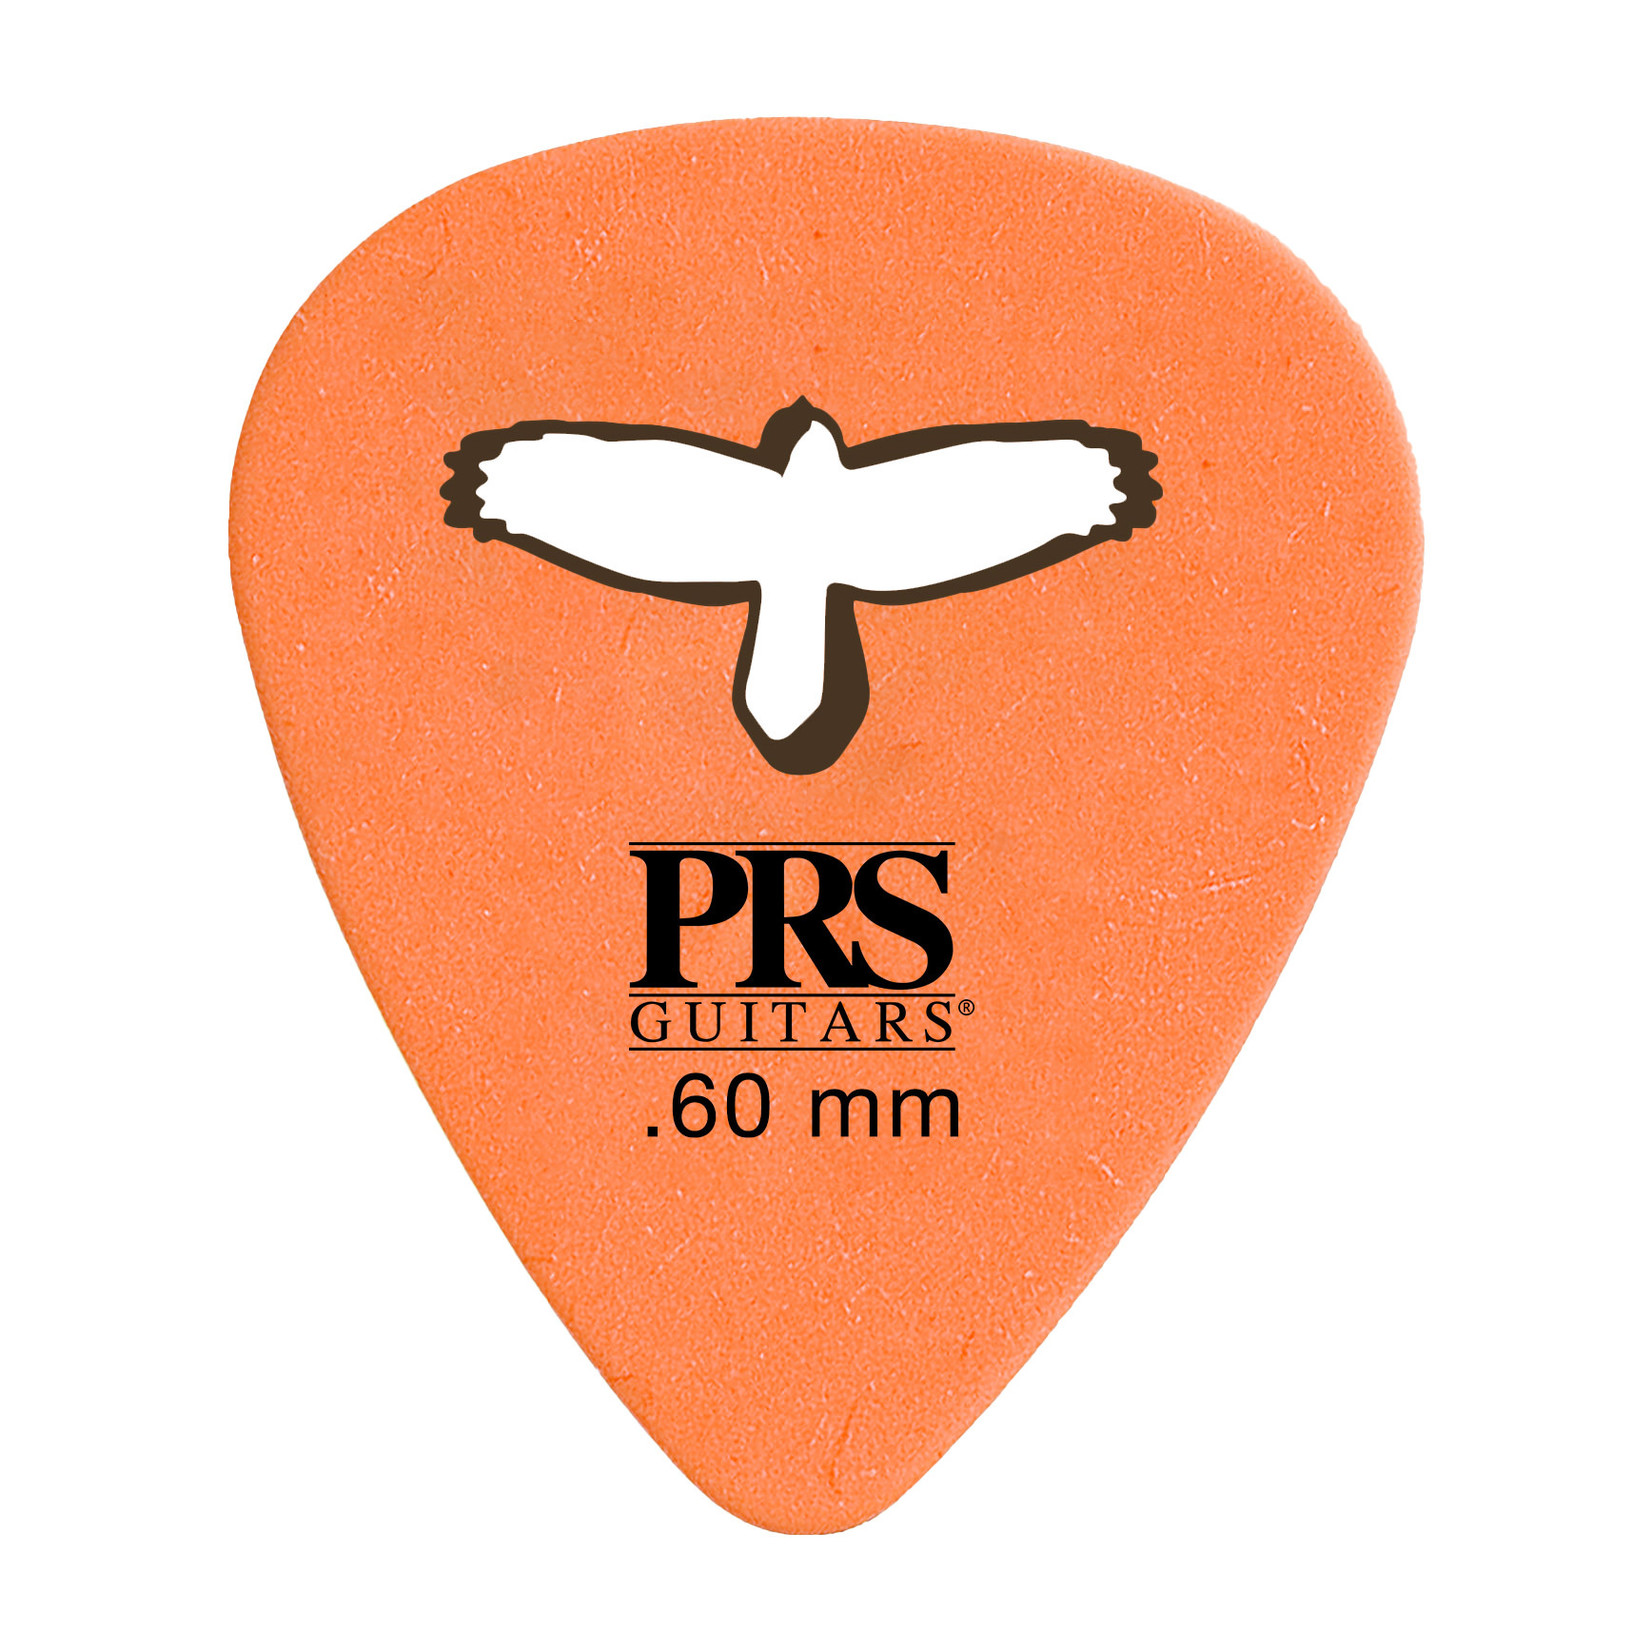 Paul Reed Smith PRS Delrin Punch Picks (12), Orange 0.60mm